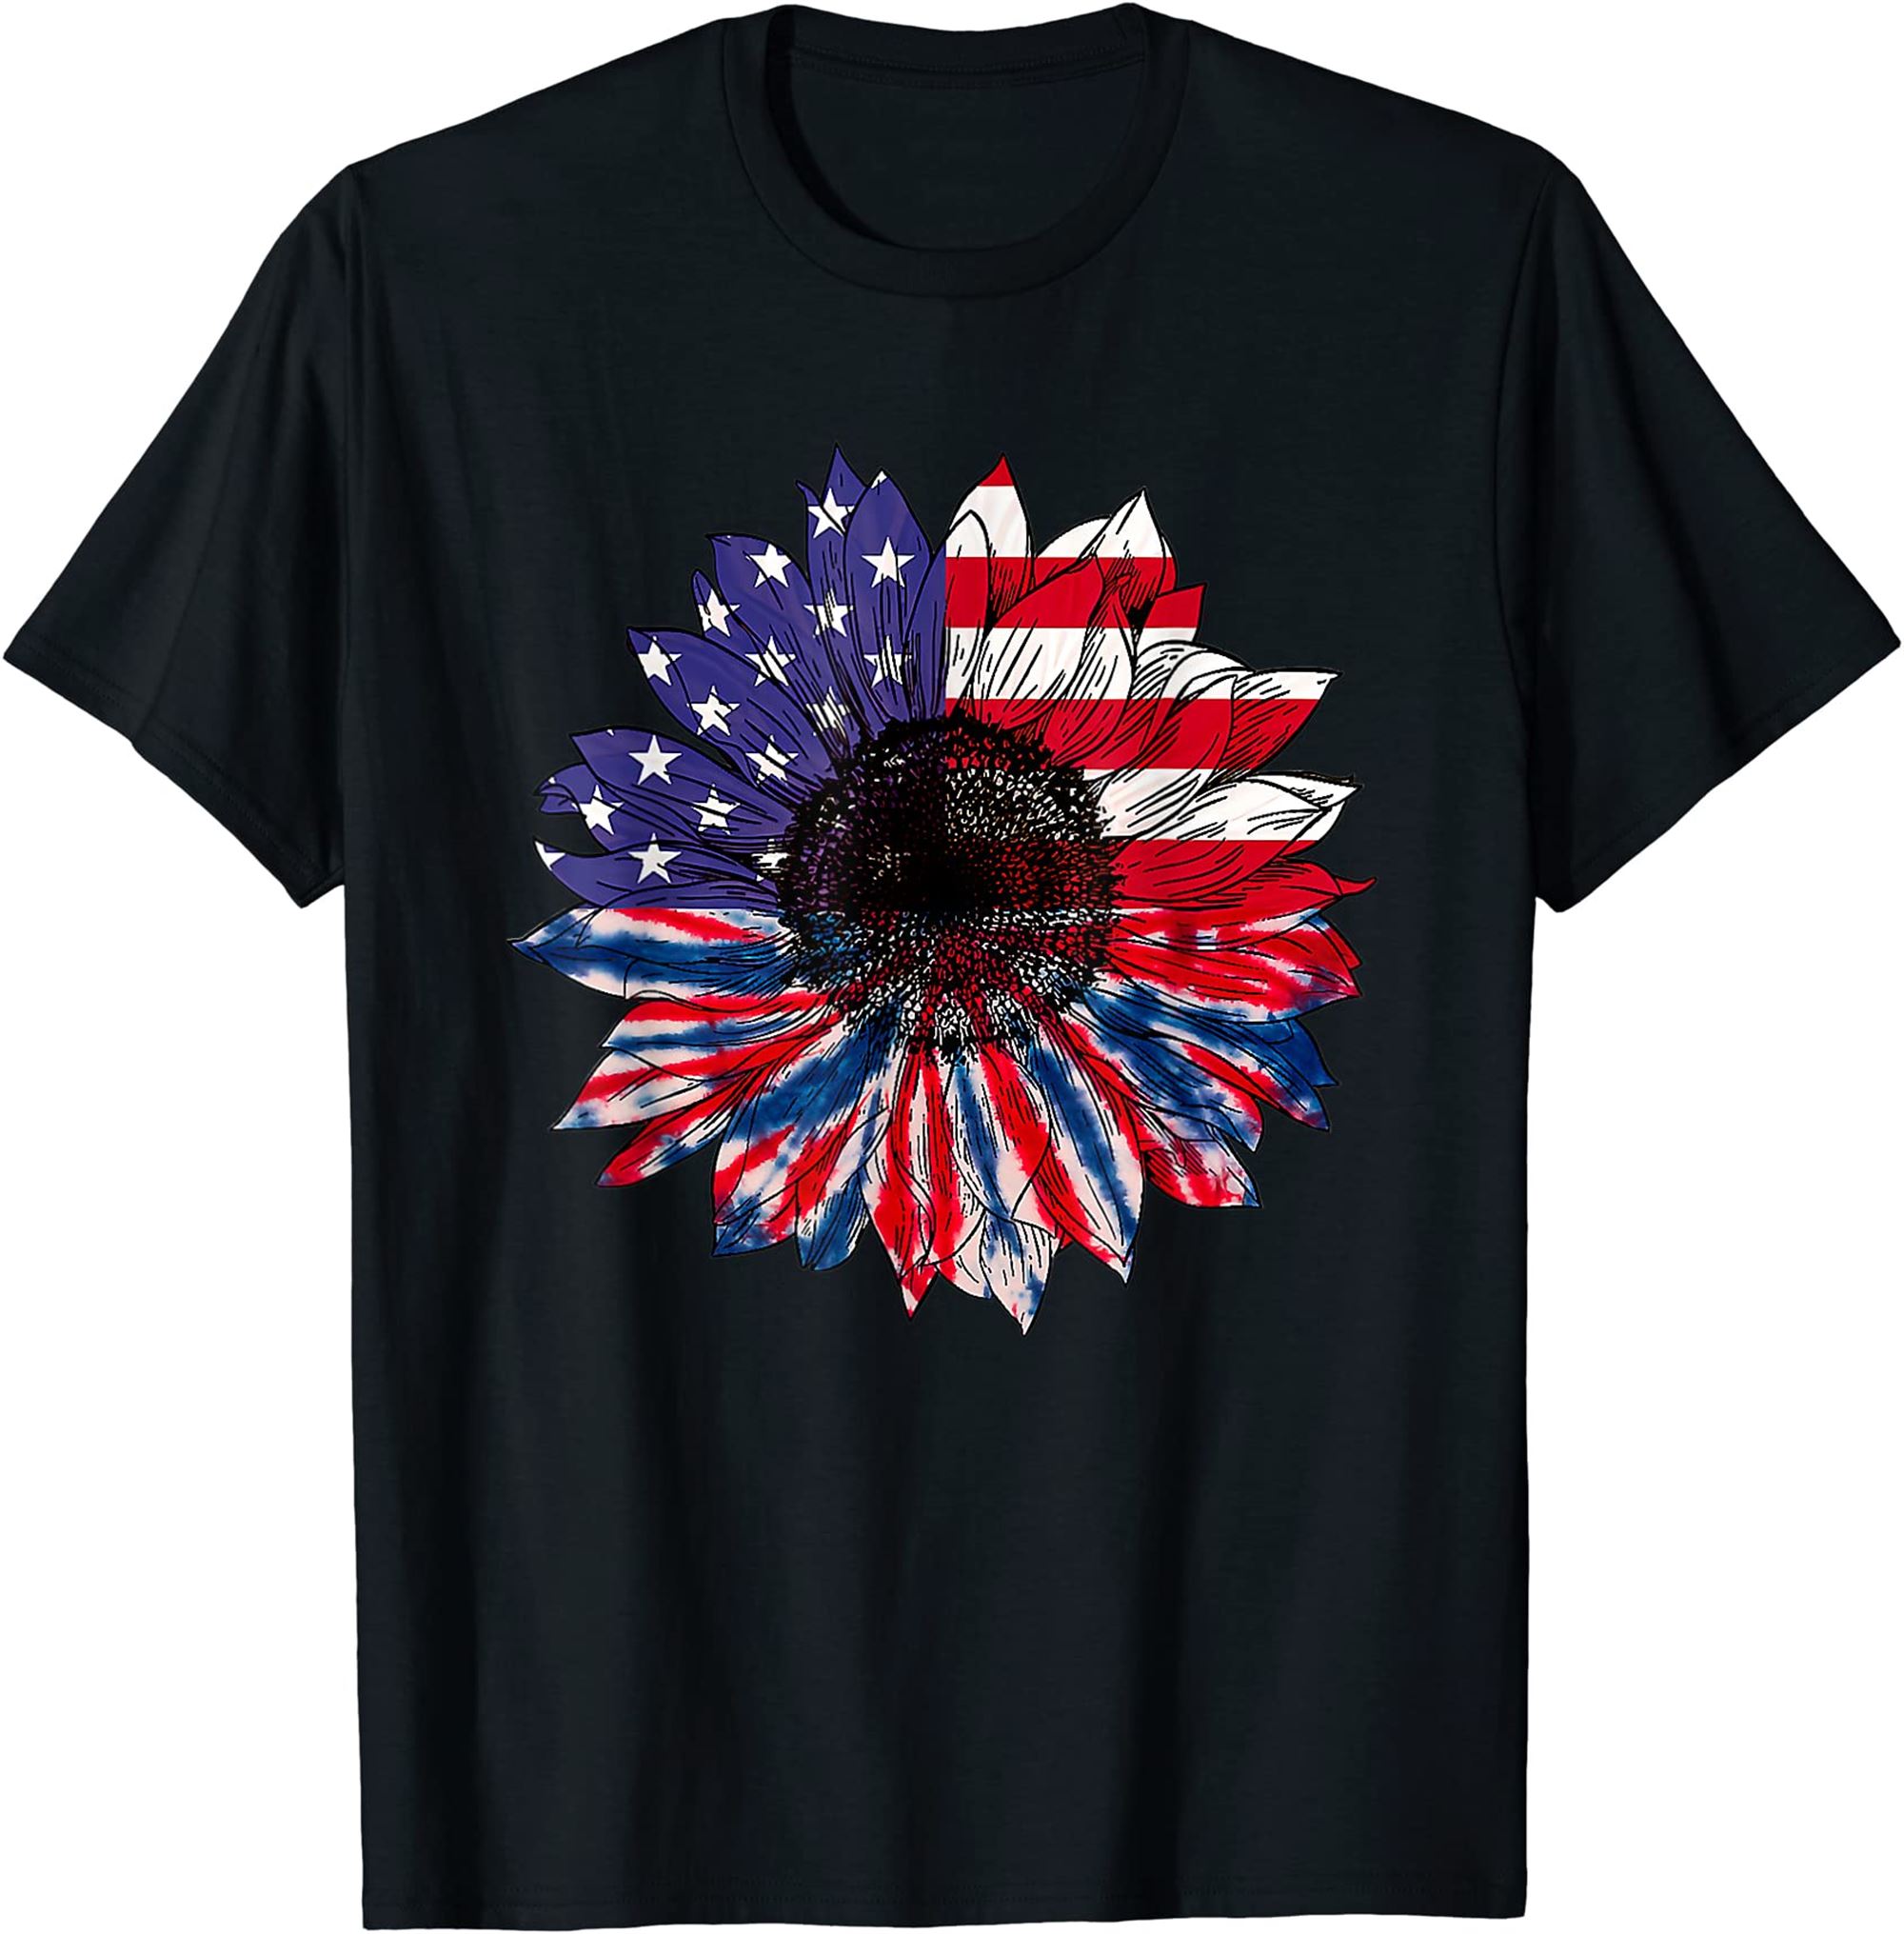 American Flag Sunflower Red White Blue Tie Dye 4th Of July T-shirt Full Size Up To 5xl